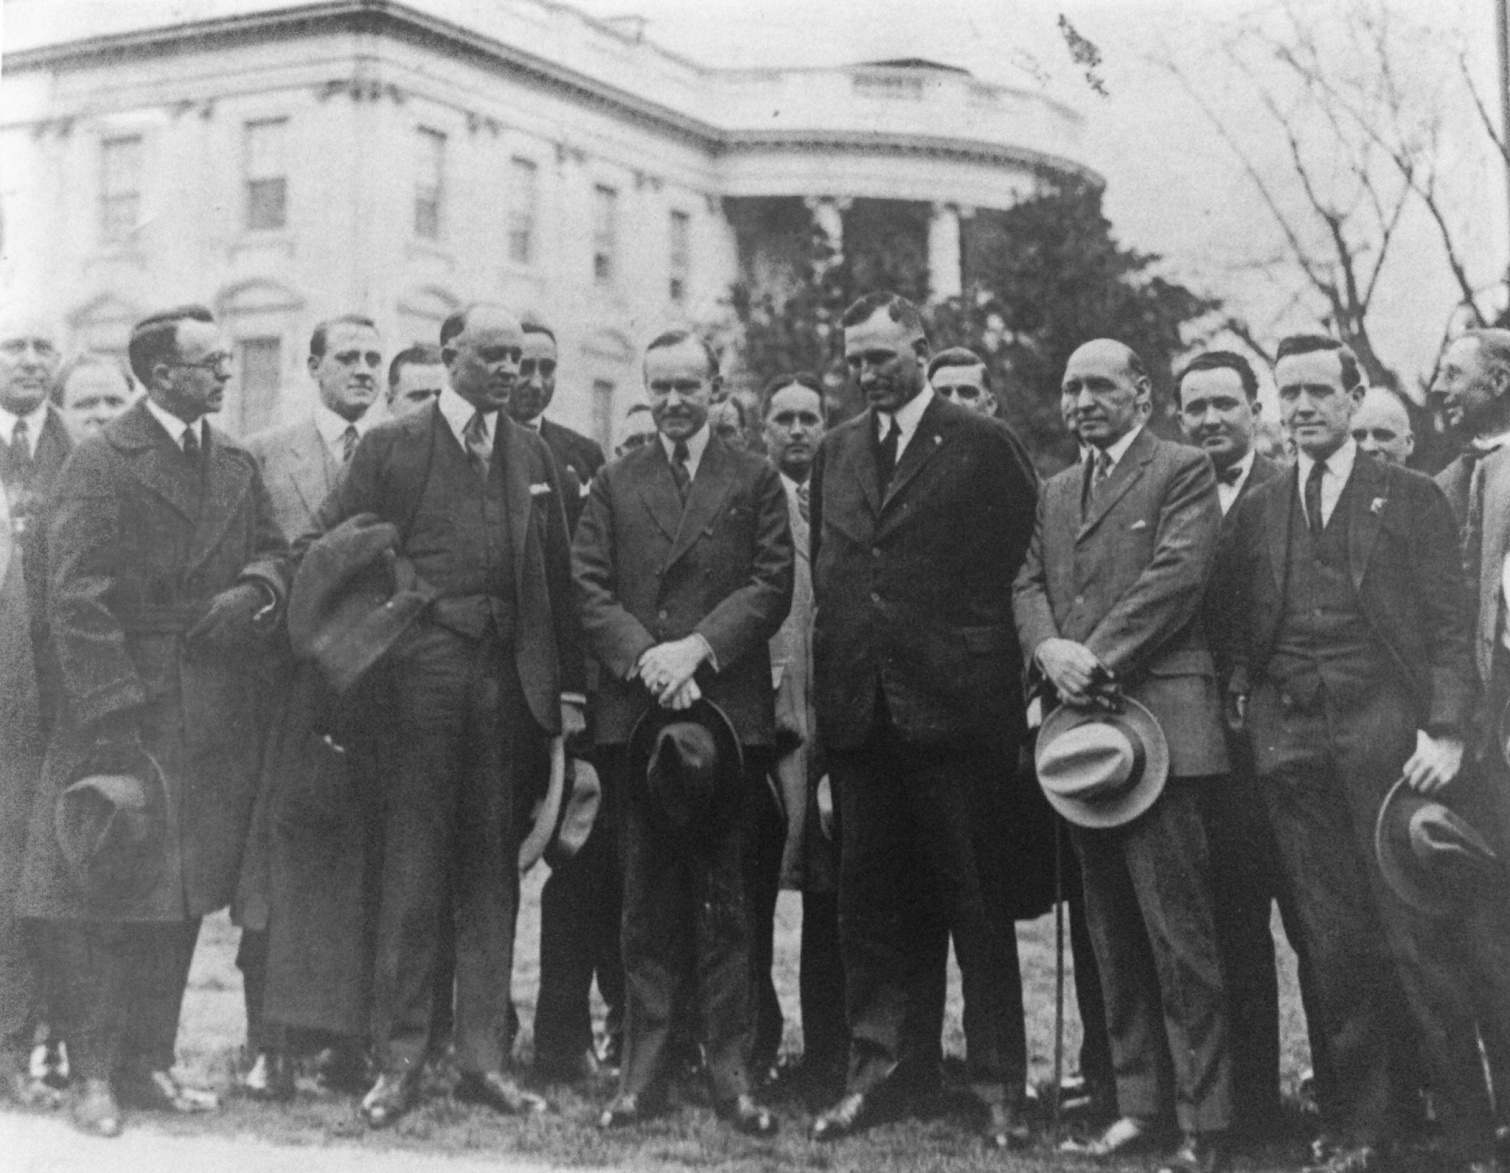 President Coolidge surrounded by members of the American Legion, led by John Quinn, pressuring for the Veterans' Bonus Bill, what would become the World War Adjusted Compensation Act passed by Congress over the President's veto, May 1924. Coolidge firmly disagreed with direct compensation levied upon the rest of the people. As he declared, "patriotism...bought and paid for is not patriotism." 